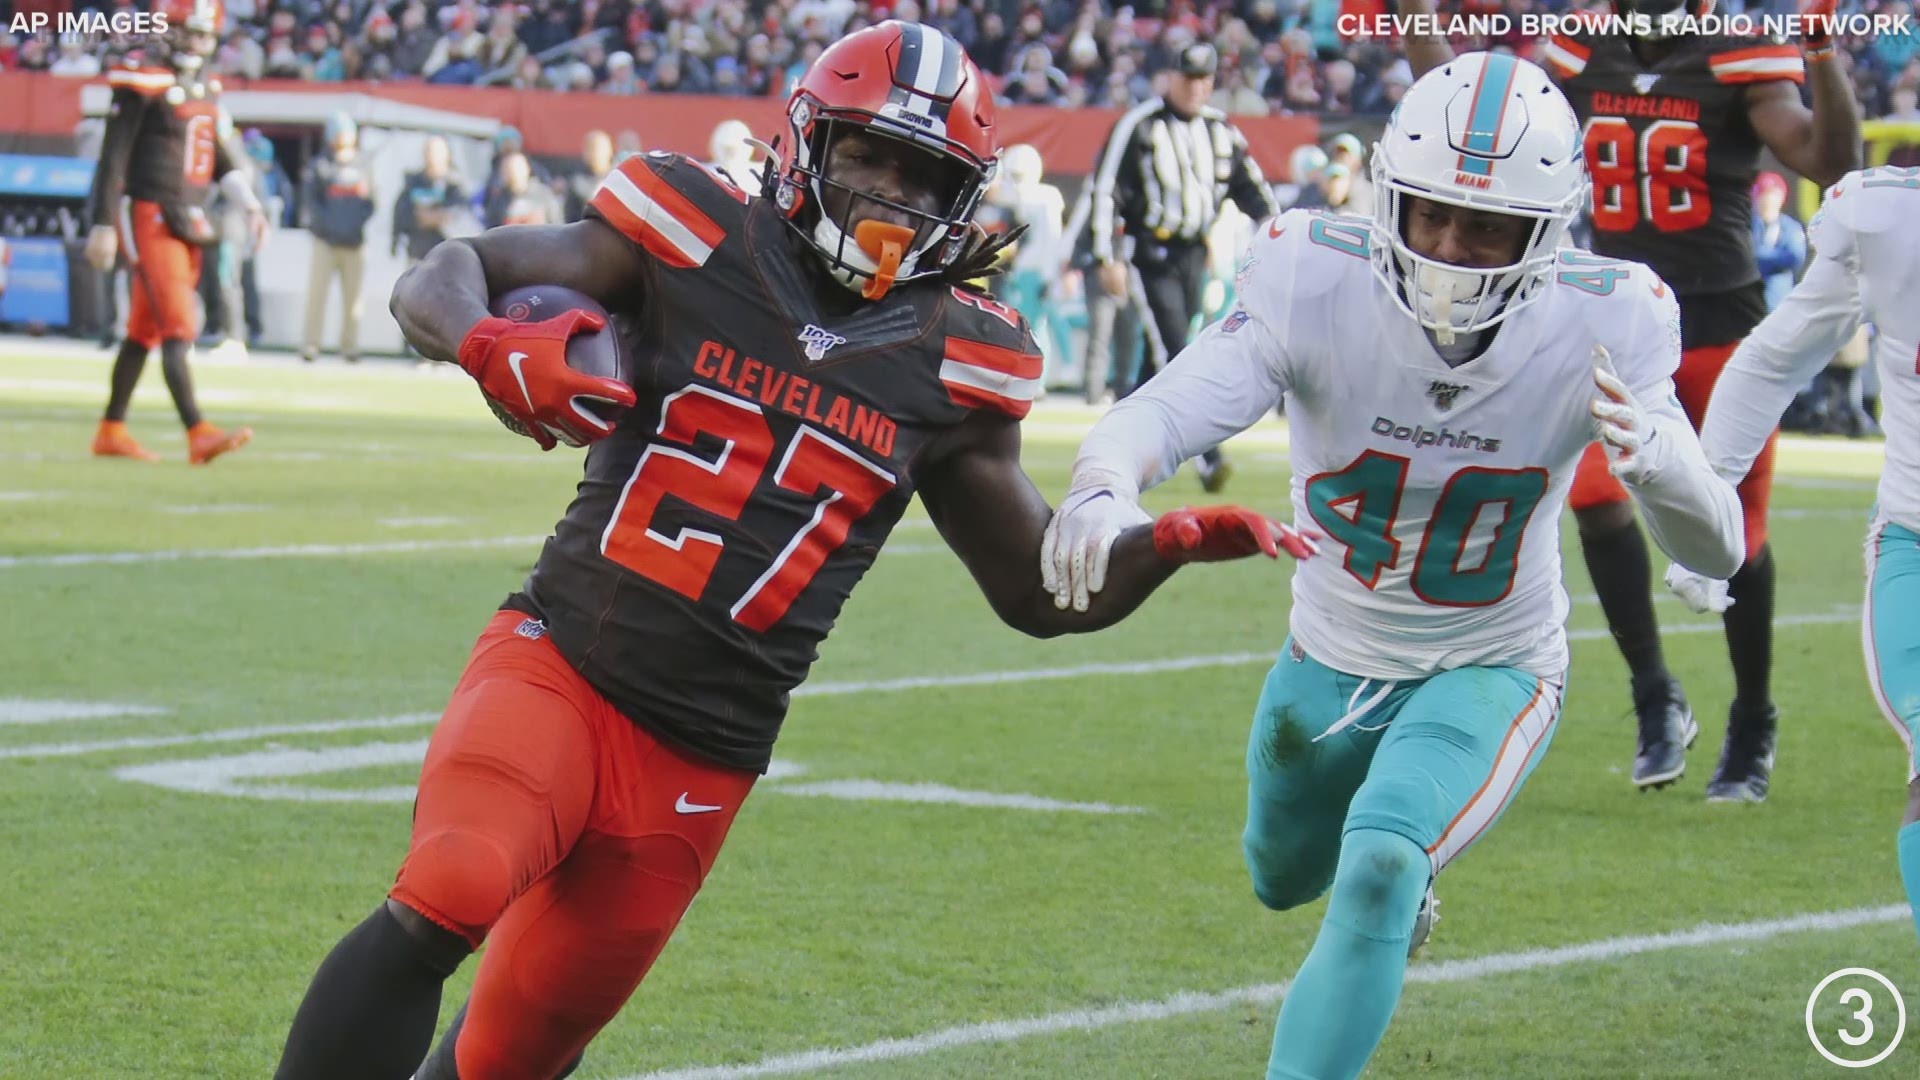 TD Hunt!  Kareem Hunt scored his first touchdown as a Cleveland Browns player late in the first half against the Miami Dolphins at FirstEnergy Stadium in Cleveland.